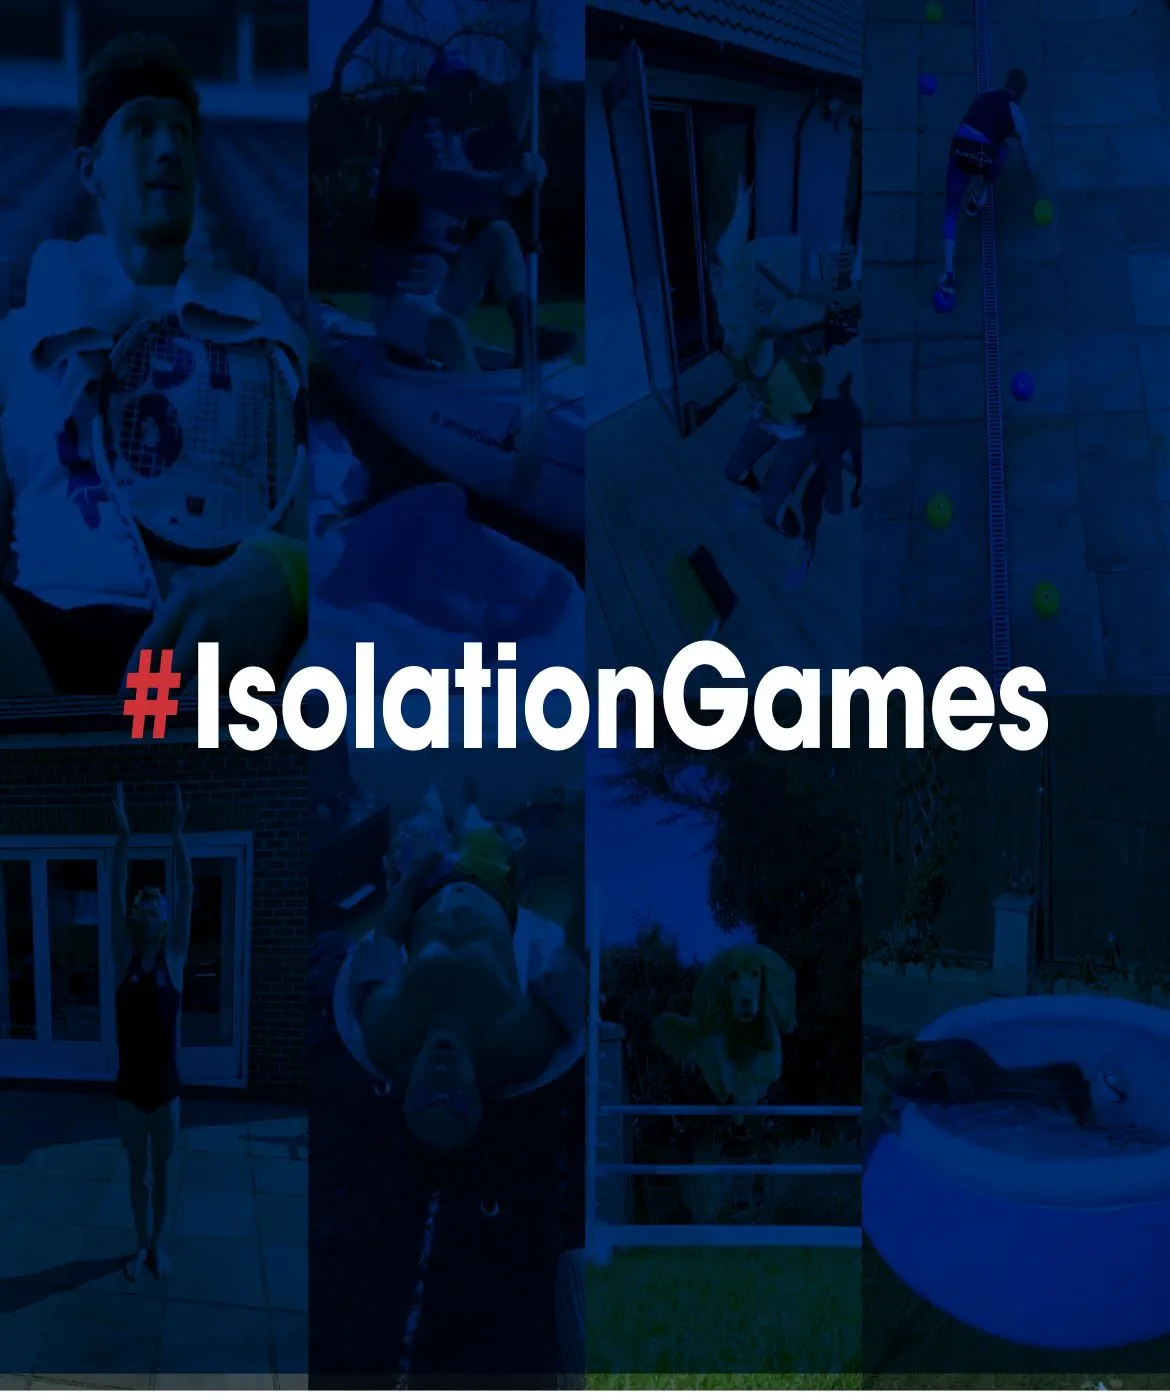 Isolation Games - recreate the summer of sport in your home